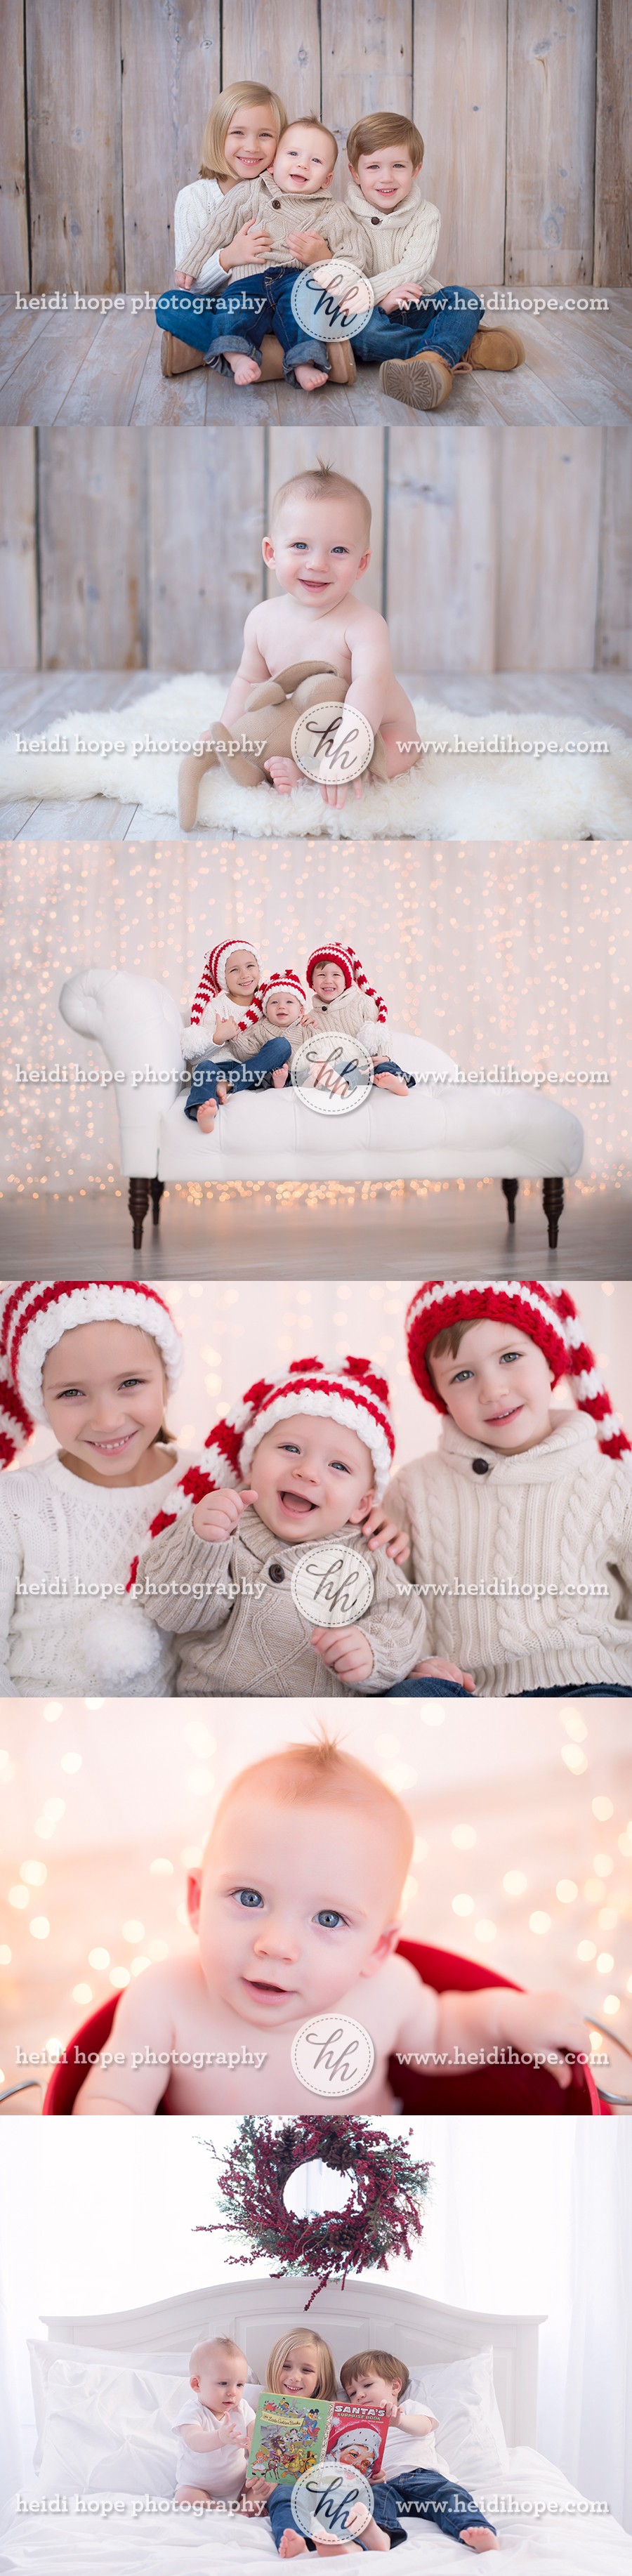 6 month old baby and siblings family christmas portraits